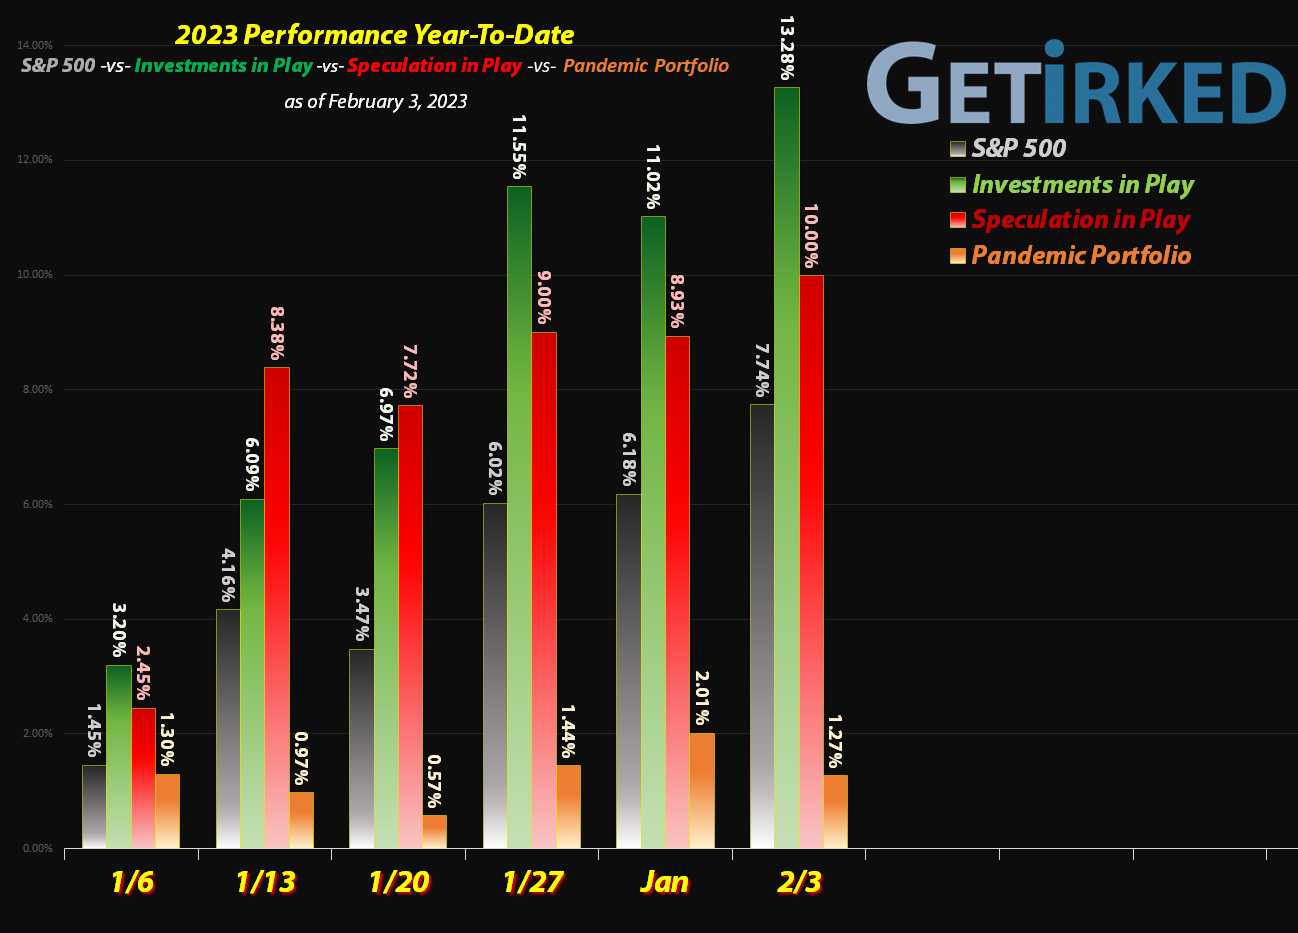 Get Irked - Year-to-Date Performance - Investments in Play vs. Speculation in Play - 2023 Year-to-Date Performance